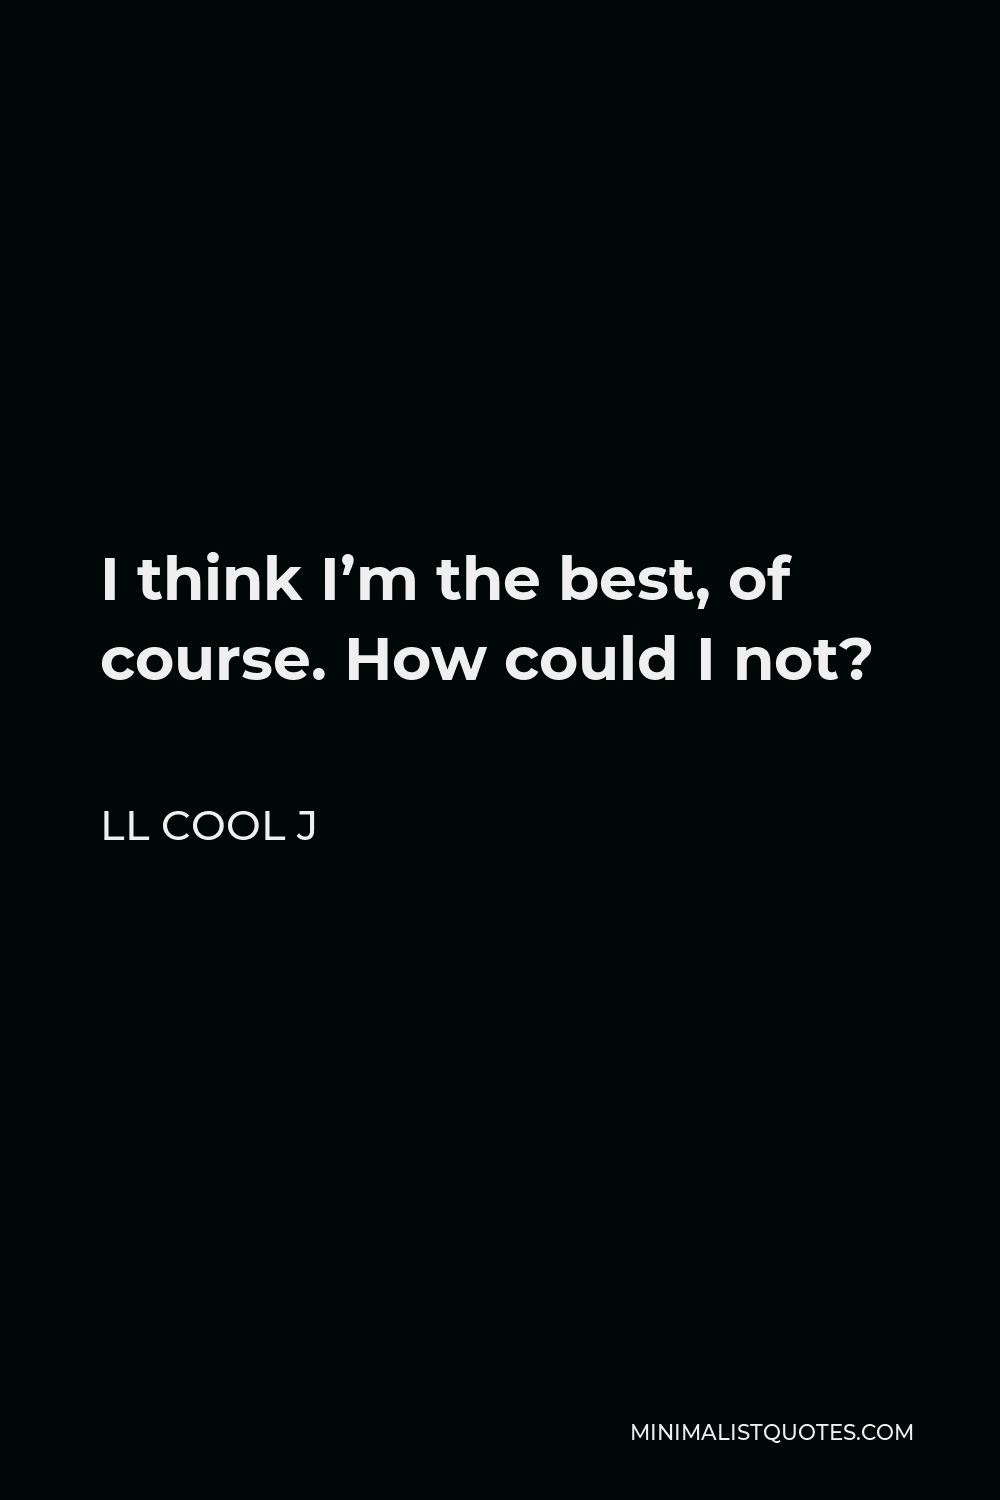 LL Cool J Quote - I think I’m the best, of course. How could I not?